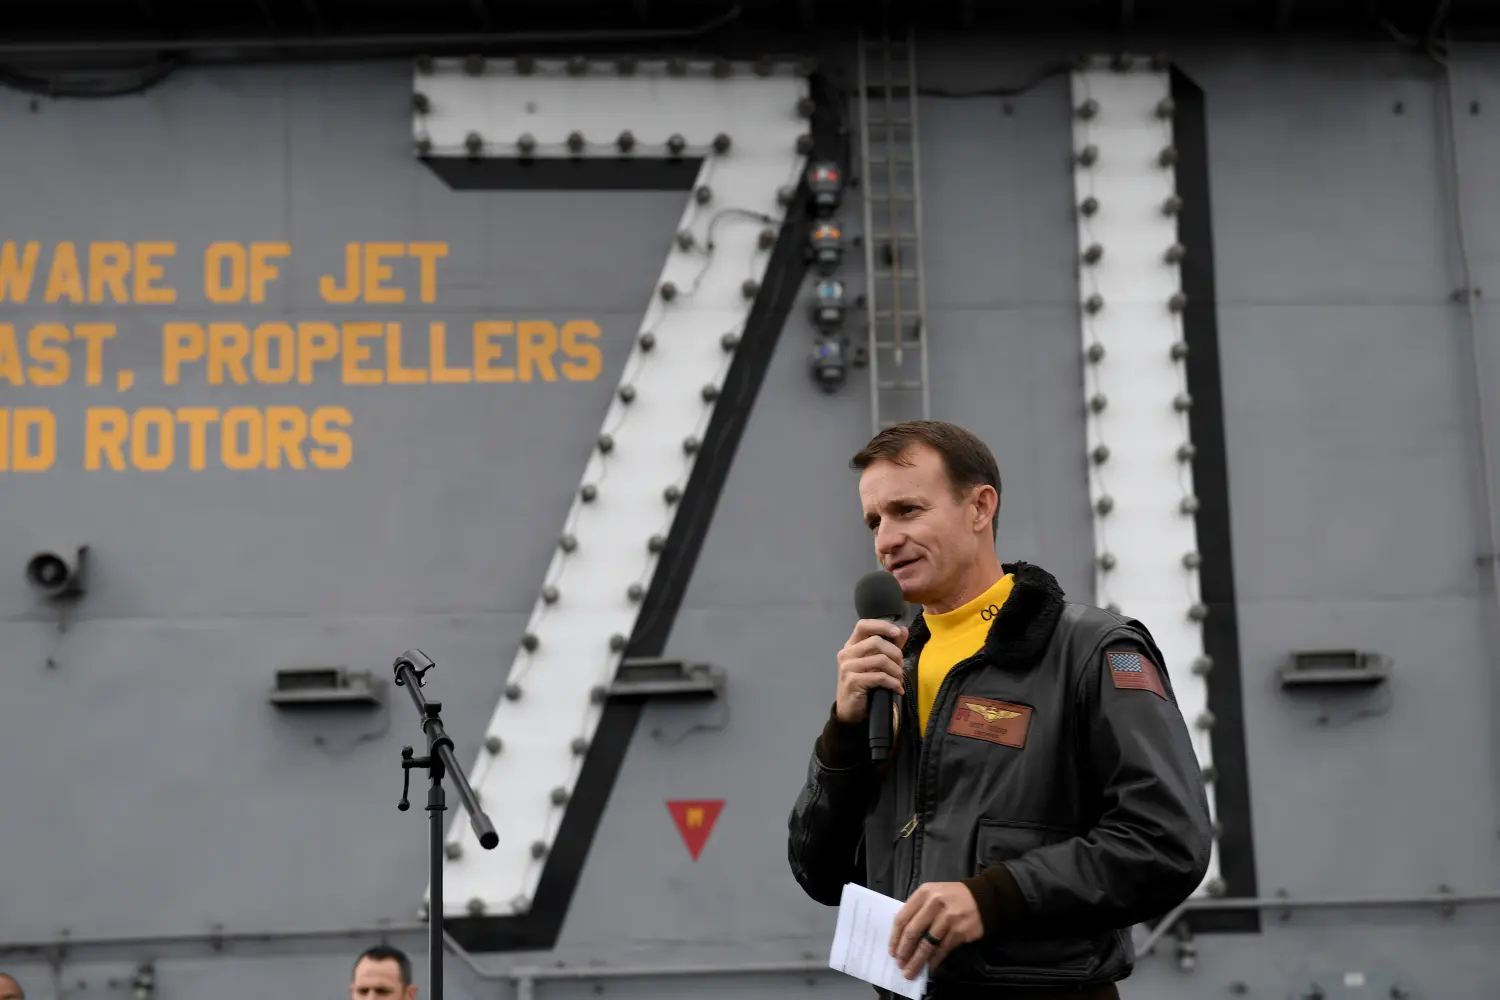 REFILE - CORRECTING YEAR Captain Brett Crozier, commanding officer of the U.S. Navy aircraft carrier USS Theodore Roosevelt, addresses the crew during an all-hands call on the ship’s flight deck in the eastern Pacific Ocean December 19, 2019. Picture taken December 19, 2019. U.S. Navy/Mass Communication Specialist 3rd Class Nicholas Huynh/Handout via REUTERS.  THIS IMAGE HAS BEEN SUPPLIED BY A THIRD PARTY.